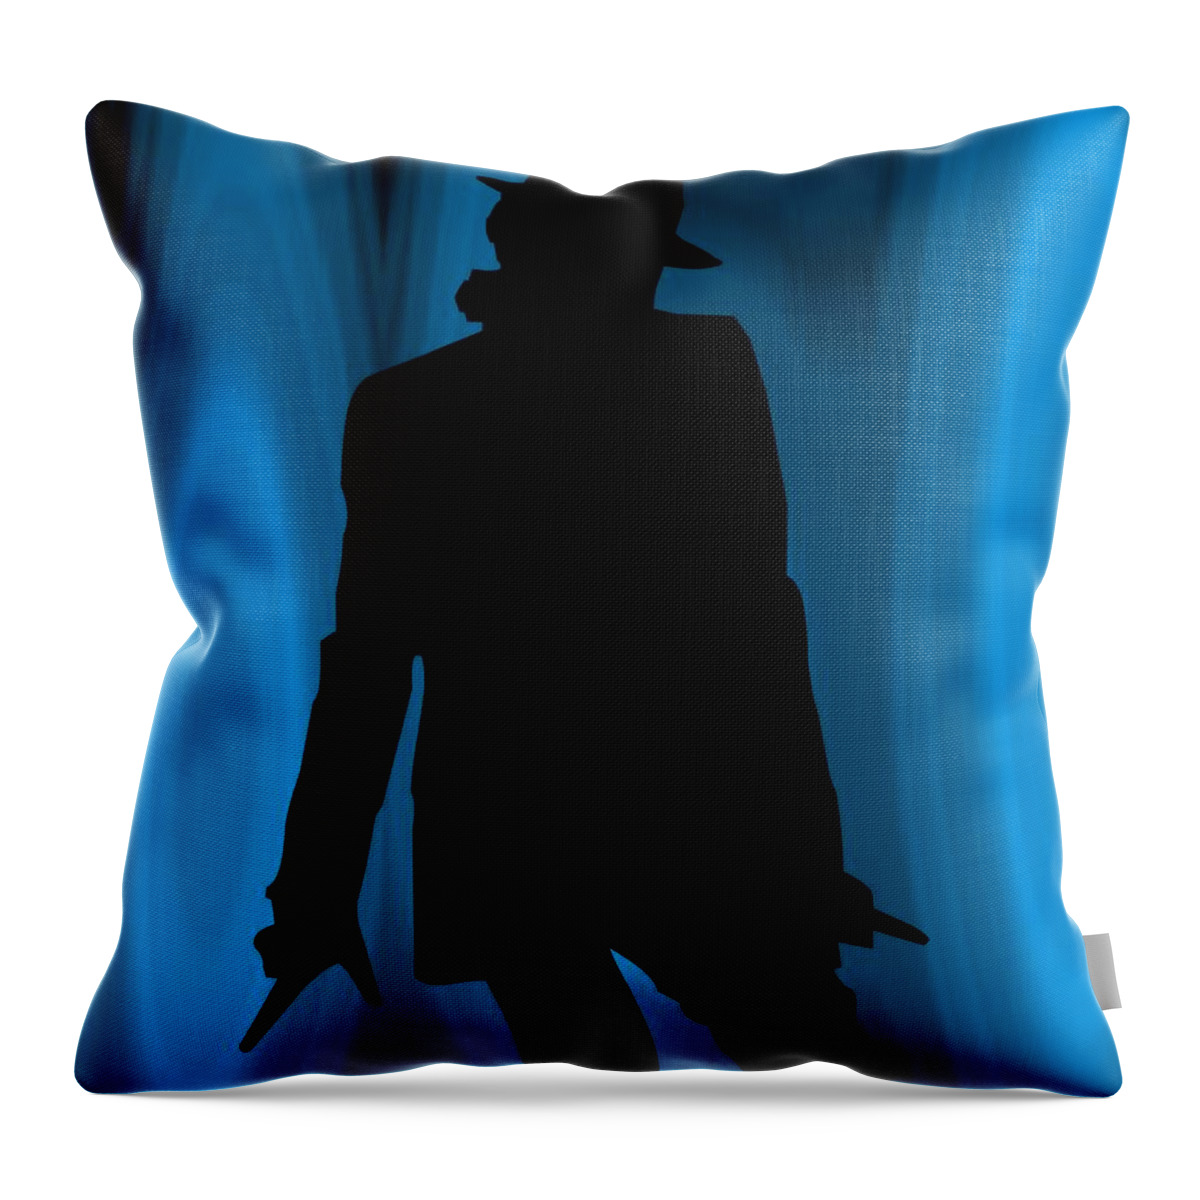 Male Portraits Throw Pillow featuring the digital art Michael by Walter Neal